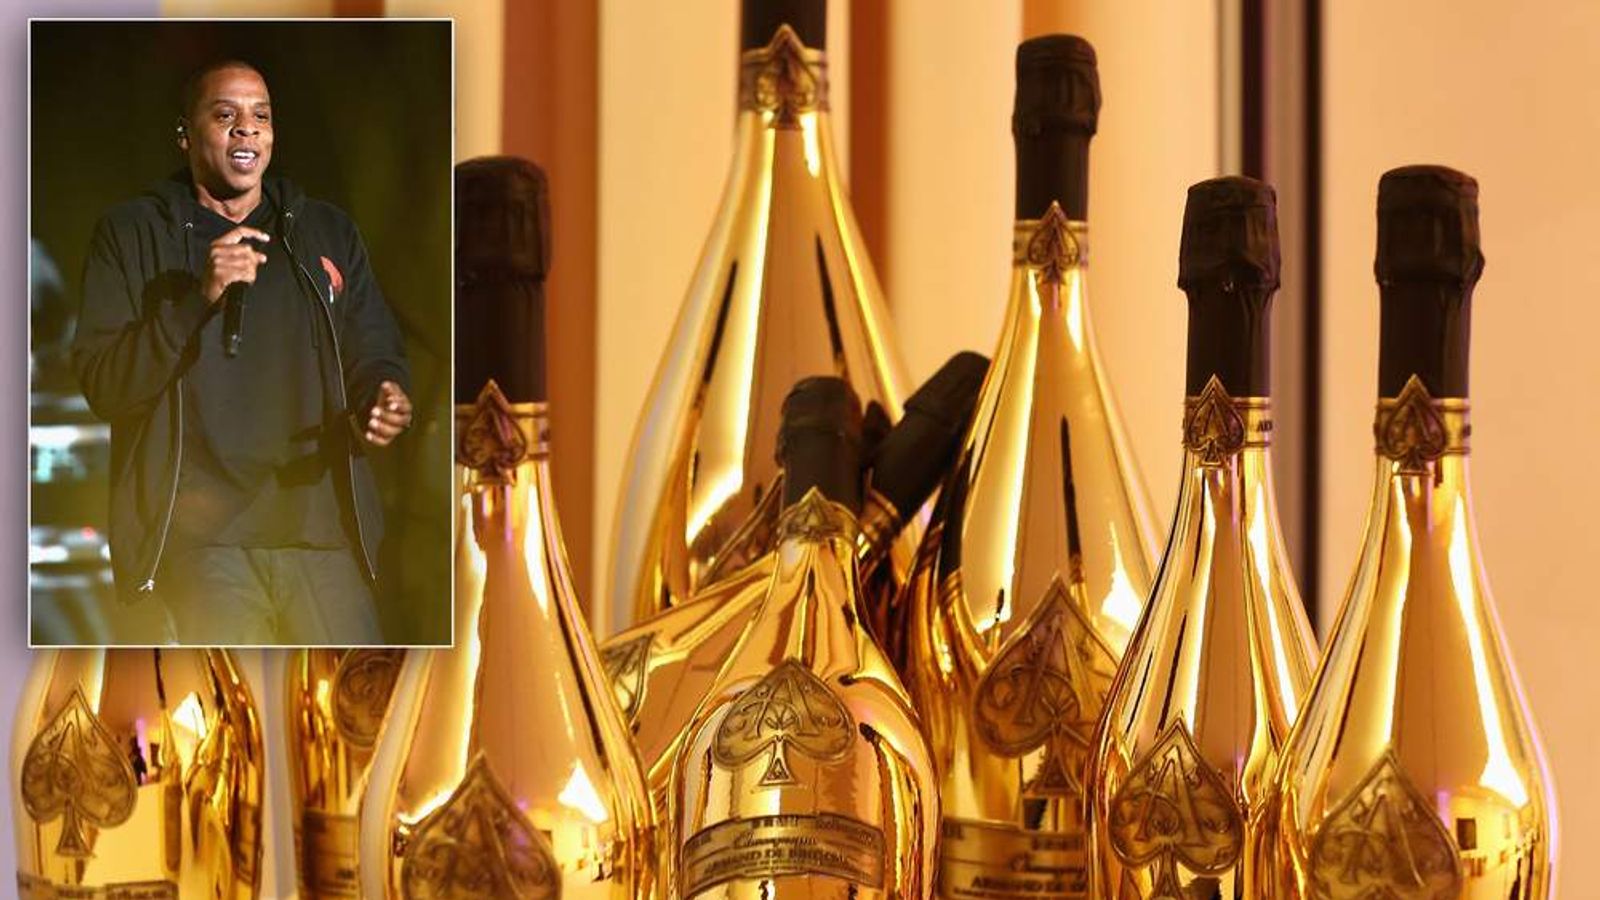 Is Jay Z's Champagne Any Good? - Dhall & Nash Fine Wines